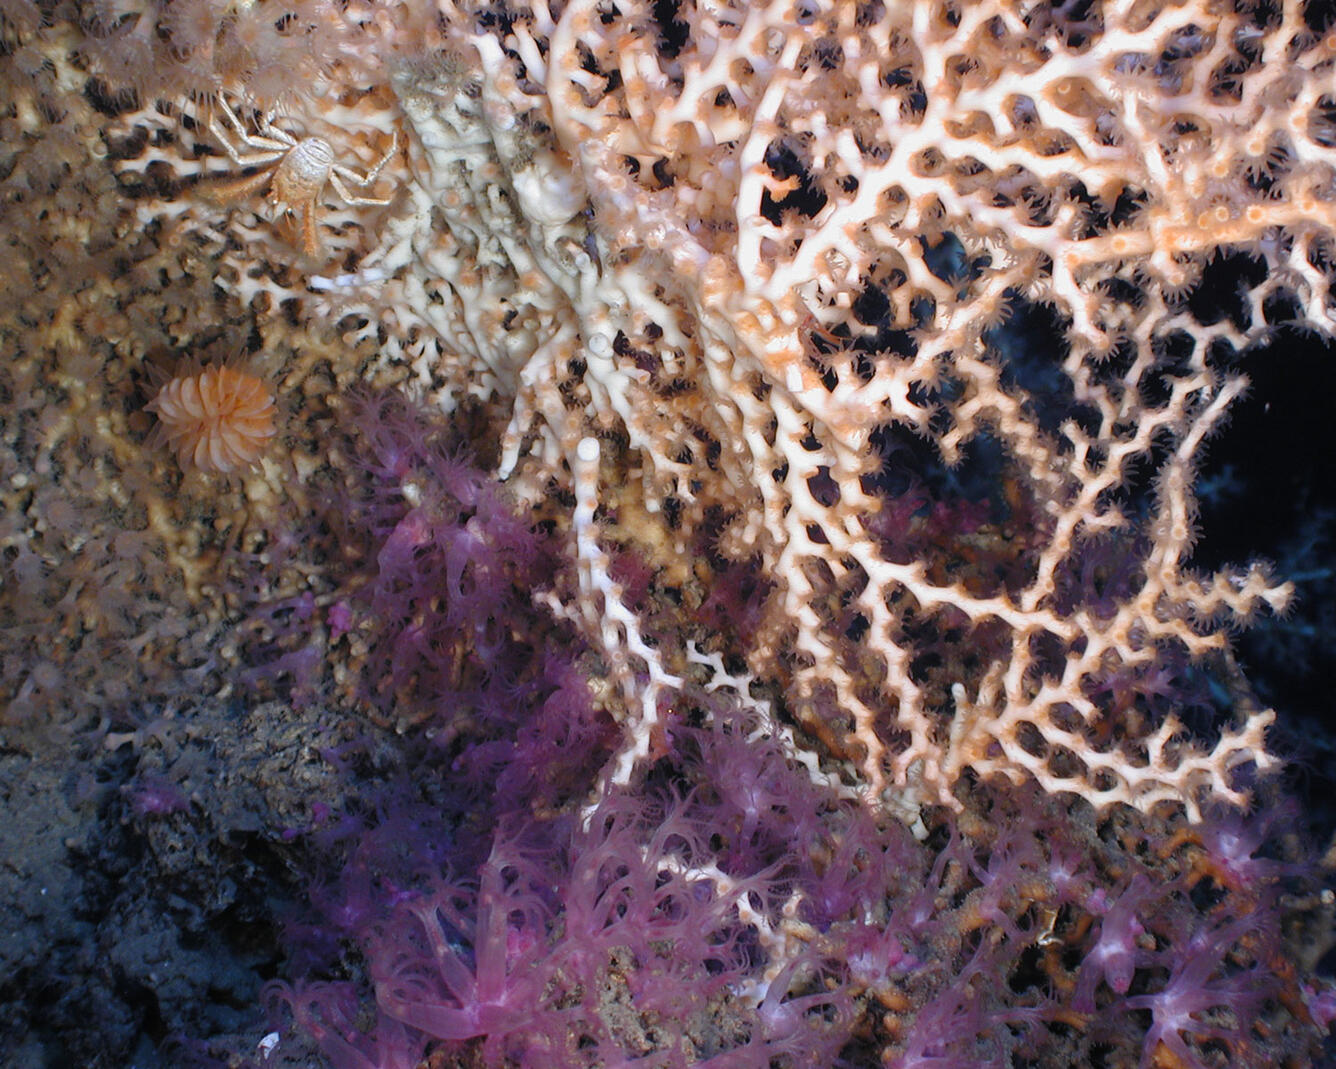 community of deep-sea corals including both hard and soft species